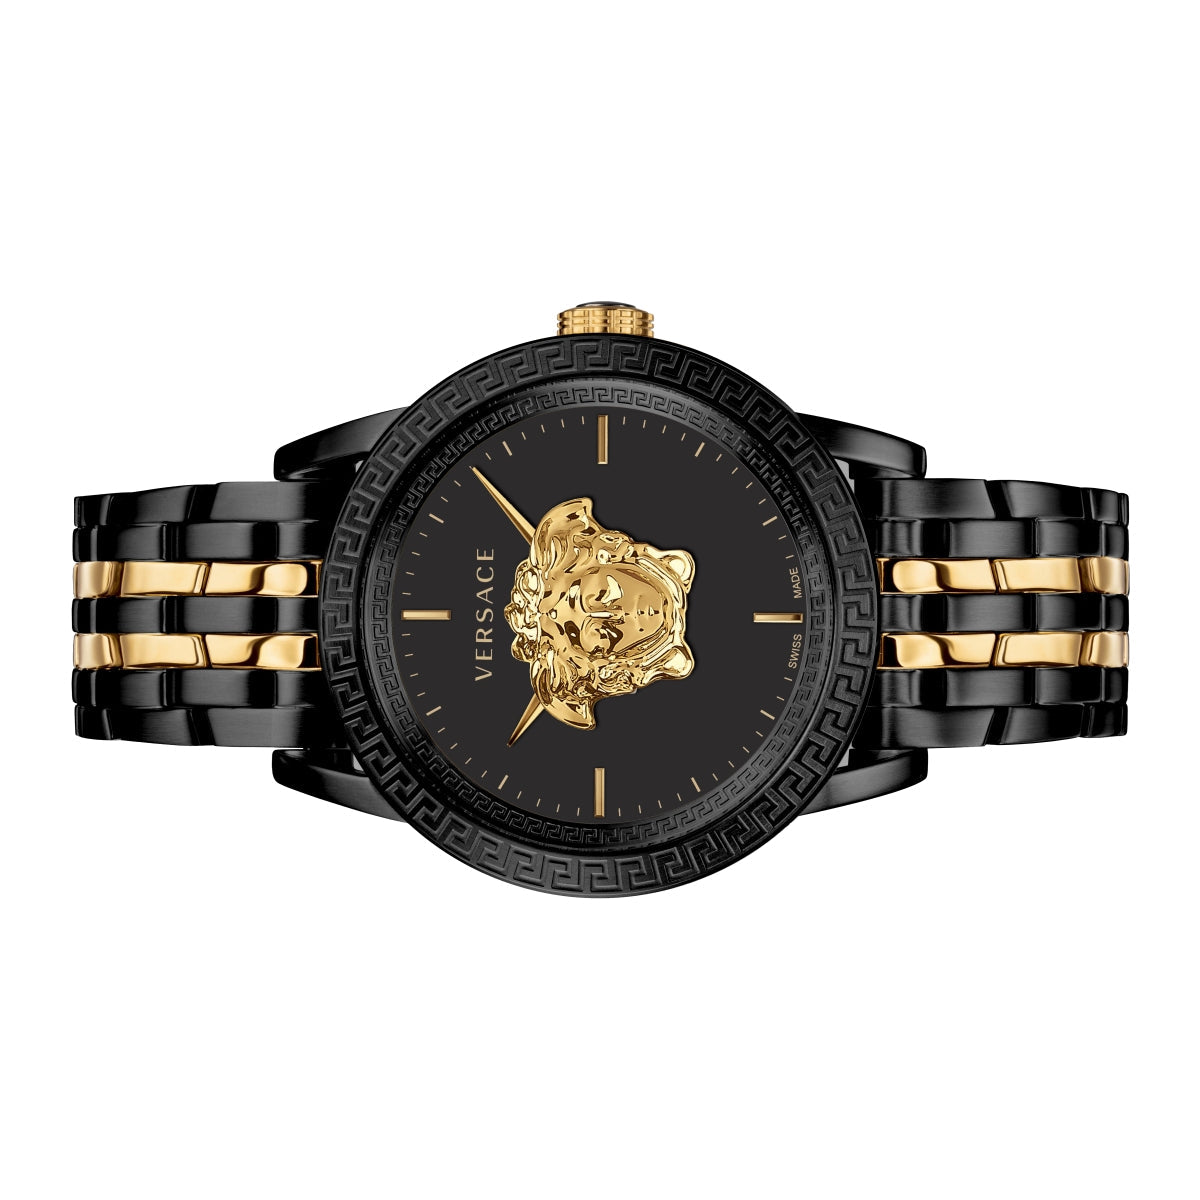 Versace Palazzo Empire Black Dial Two Tone Steel Strap Watch for Men - VERD01119